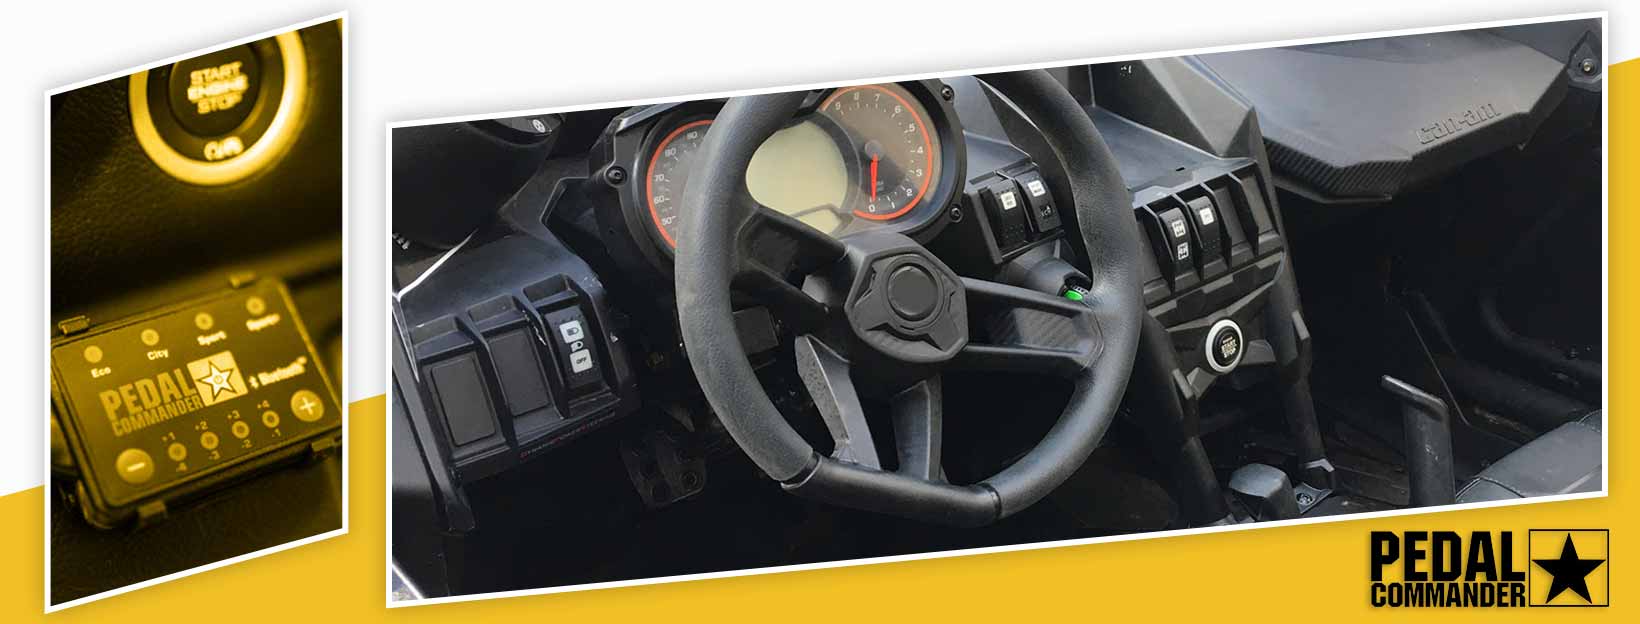 Pedal Commander for Can-Am Commander - interior